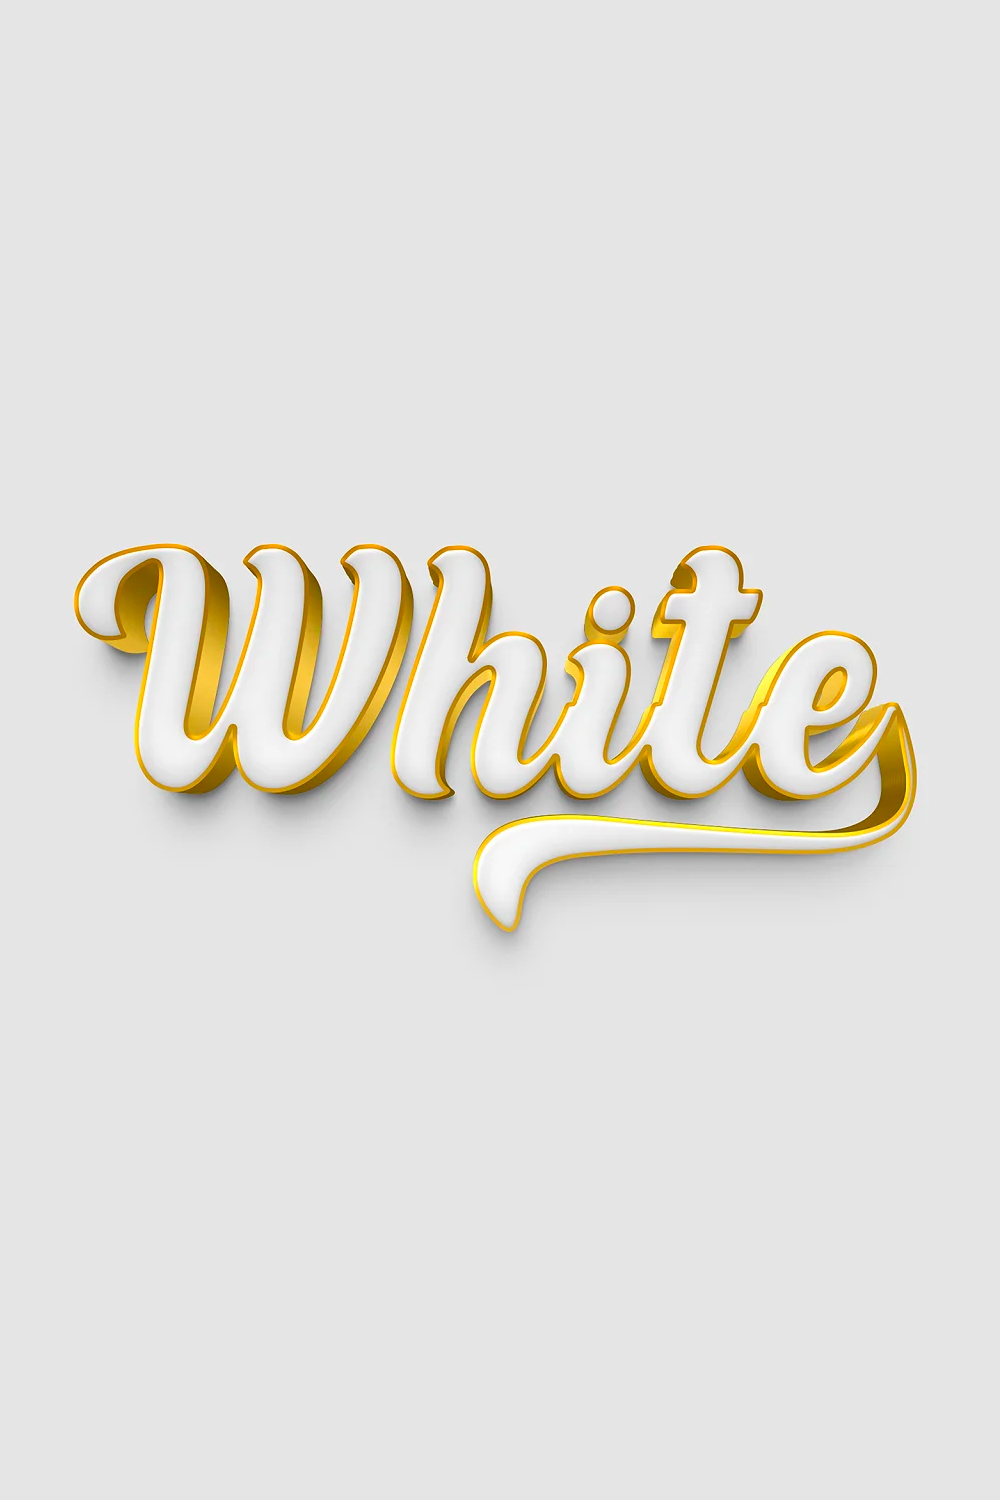 A 3d rendering of the word white on a white background.